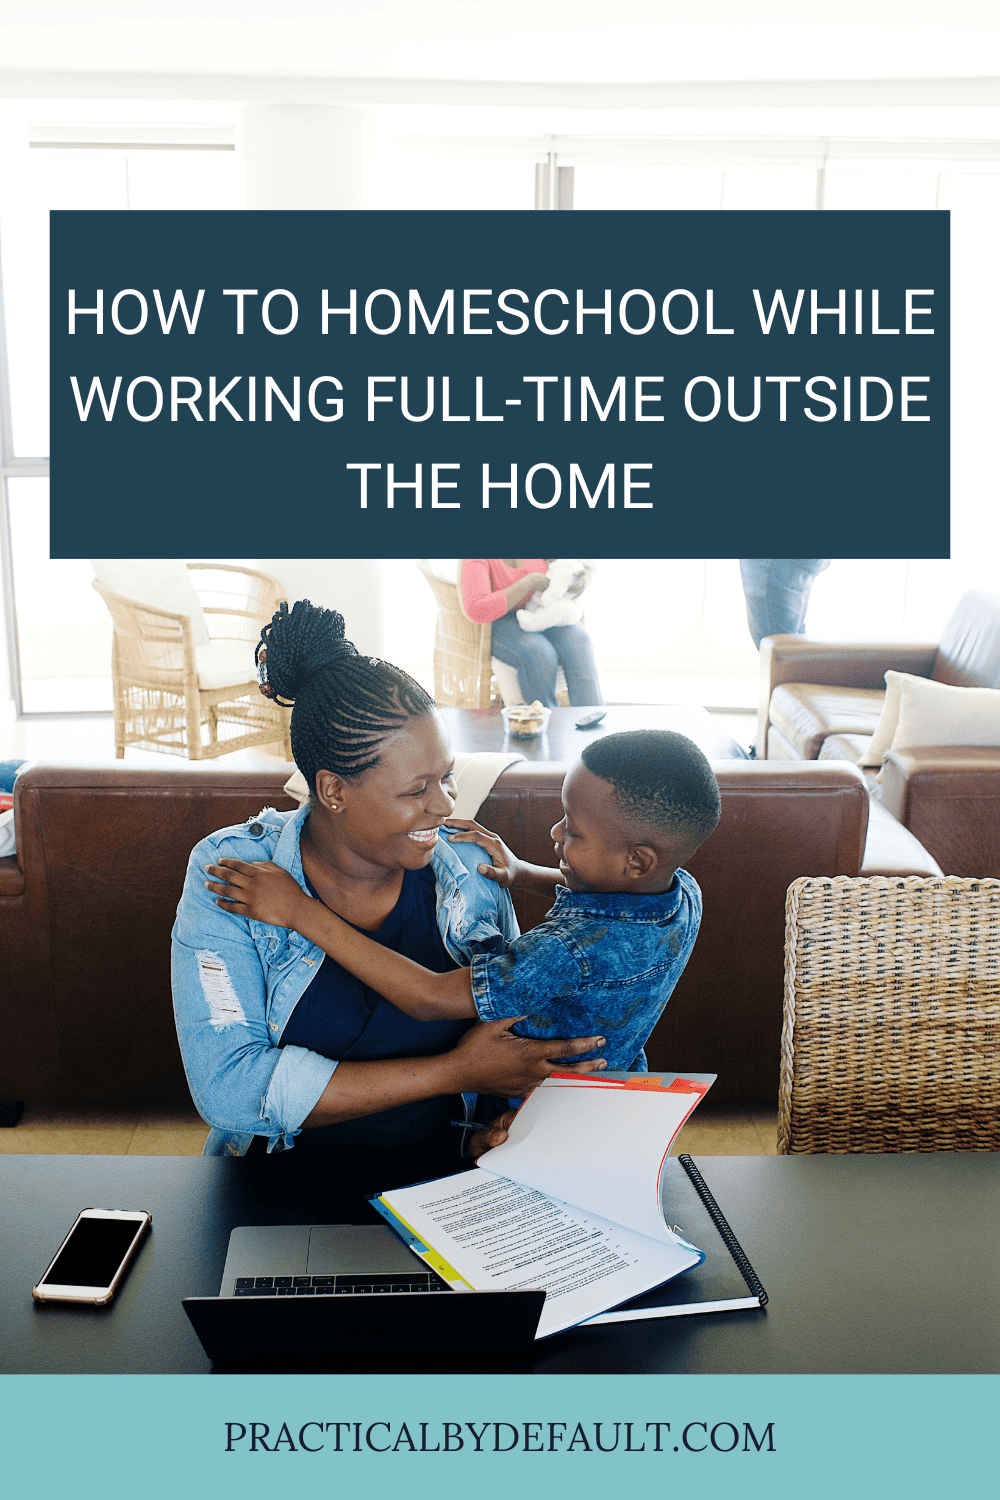 How To Homeschool While Working Full-Time Outside The Home